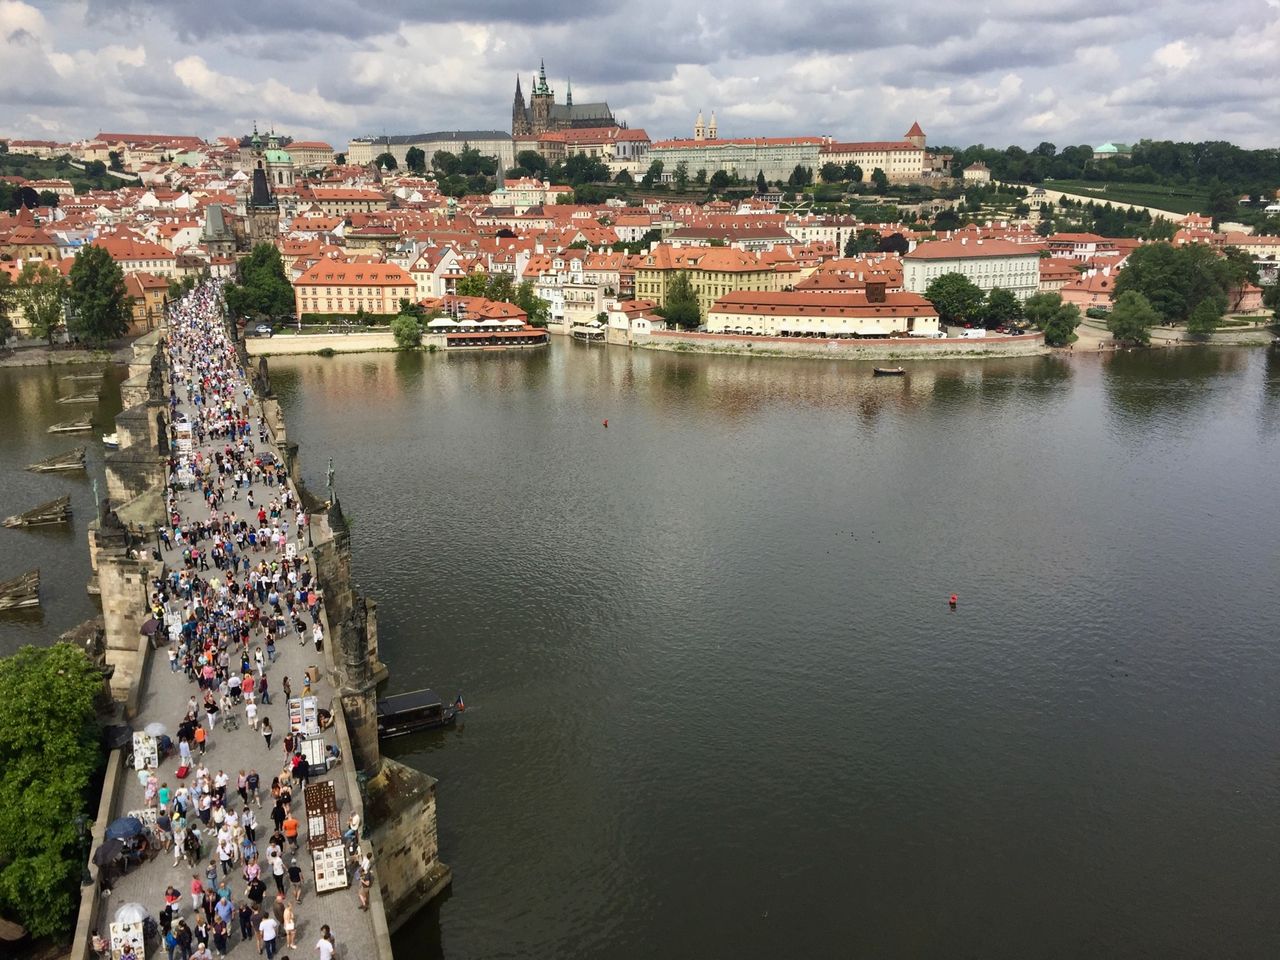 West-facing view over Charles Bridge from the Old Town Tower.